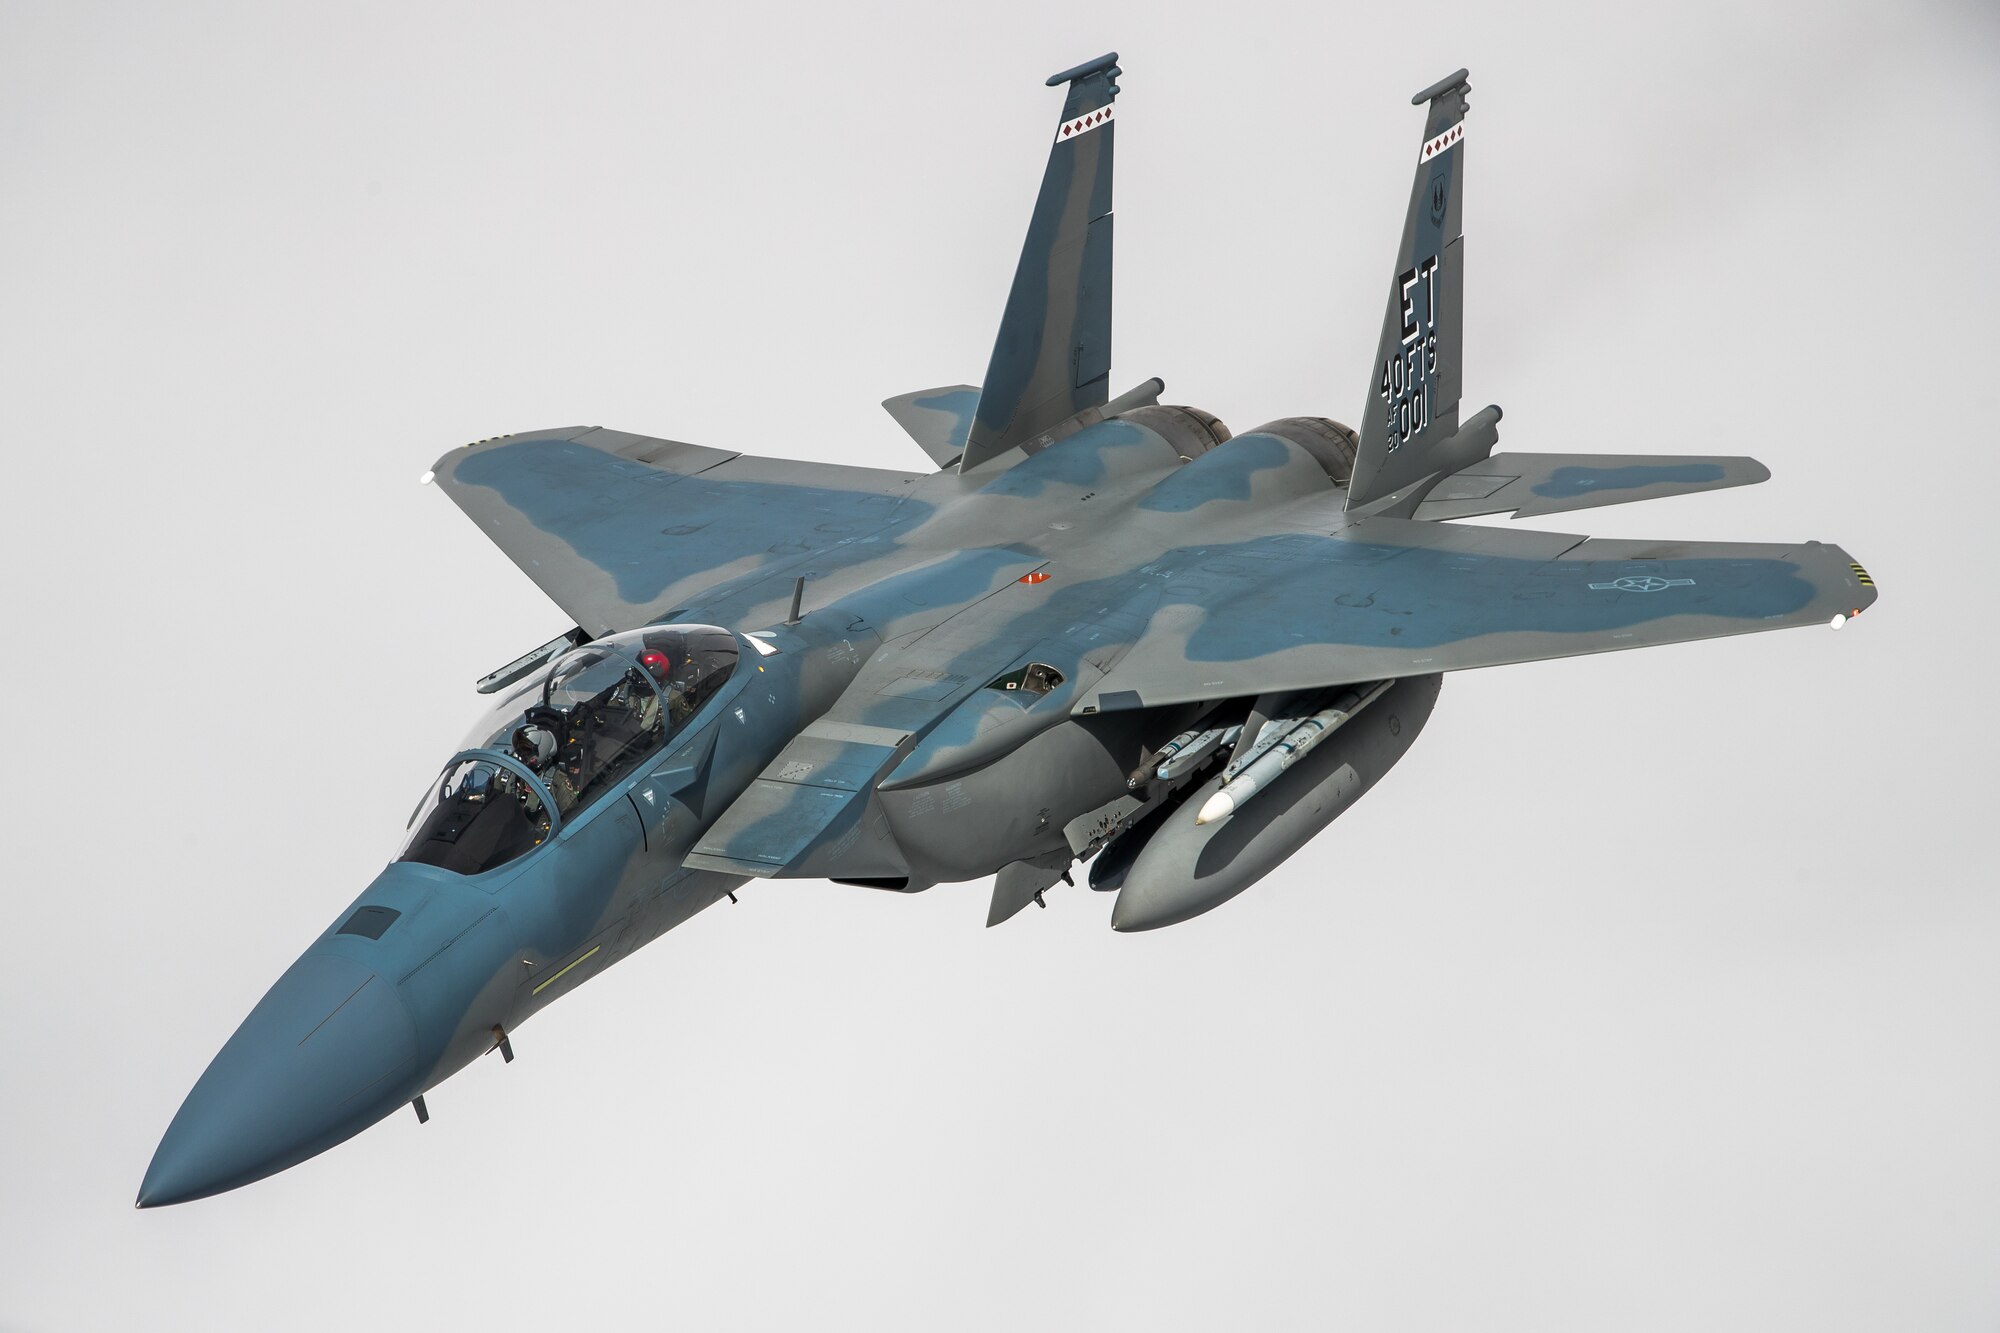 An F-15EX Eagle II from the 40th Flight Test Squadron, 96th Test Wing out of Eglin Air Force Base, Florida, flies in formation during an aerial refueling operation above the skies of Northern California, May 14. The Eagle II participated in the Northern Edge 21 exercise in Alaska earlier in May. (Air Force photo by Ethan Wagner)